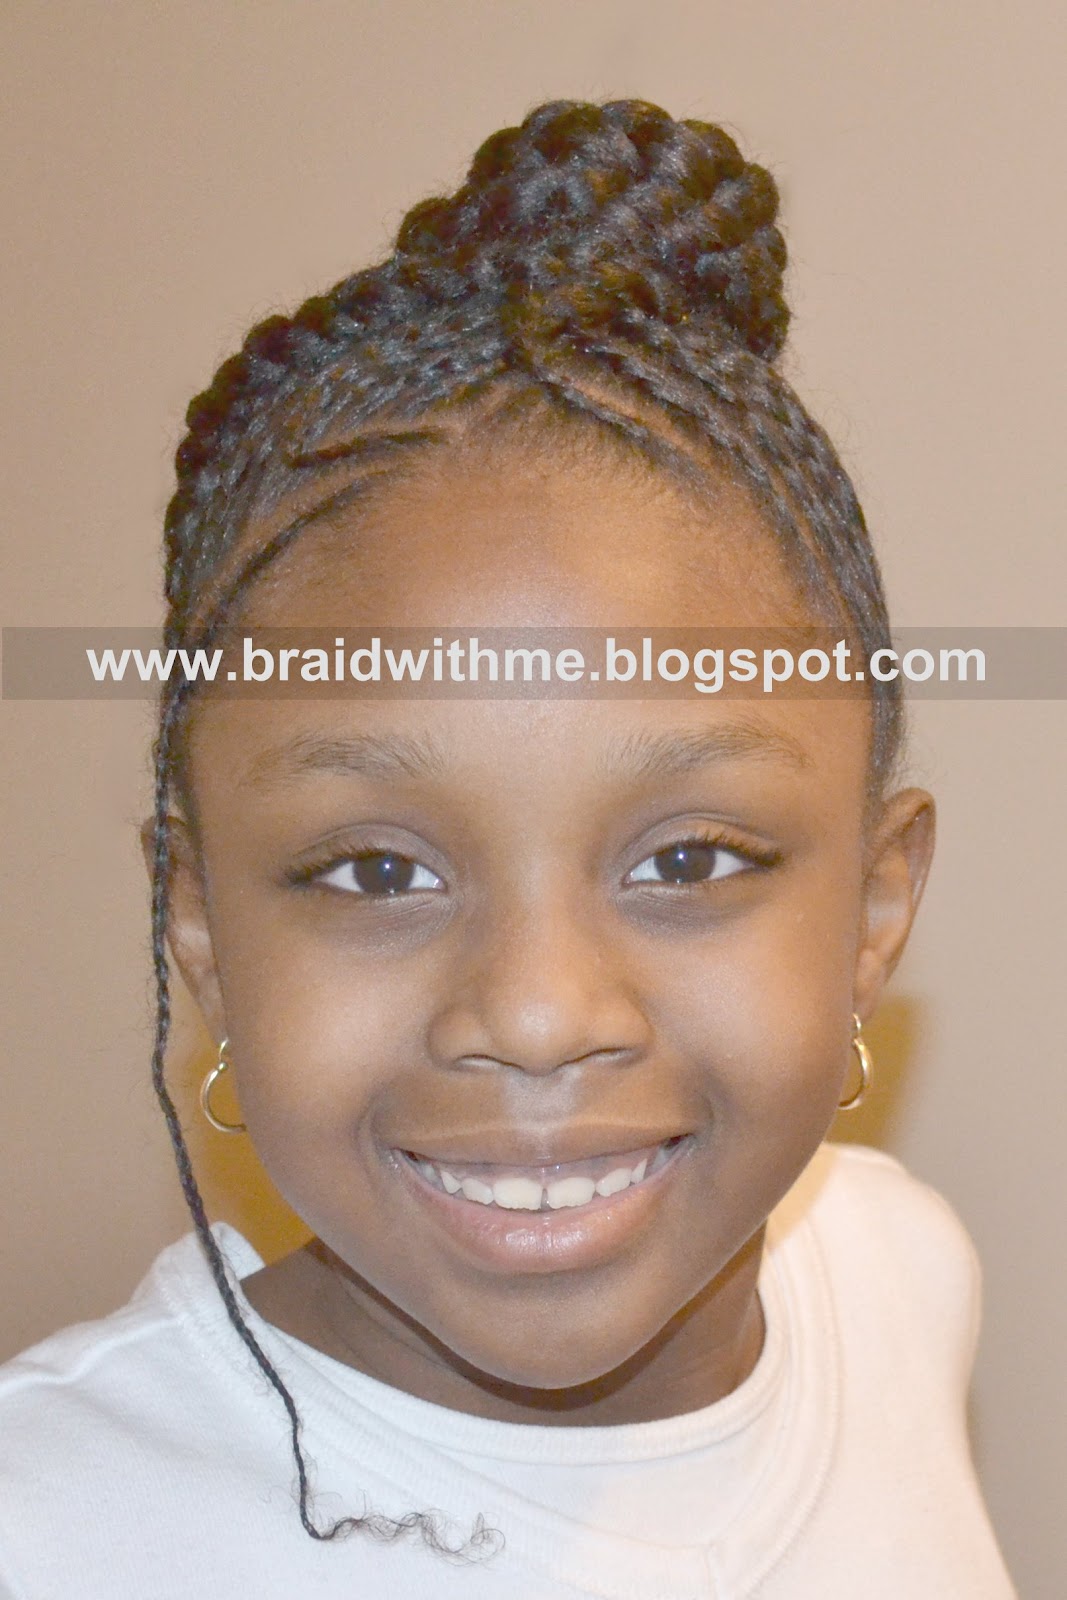 Braided Hairstyles For Black Women With Natural Hair Braided & Protected - Protective Hair Style on Child's Natural Hair